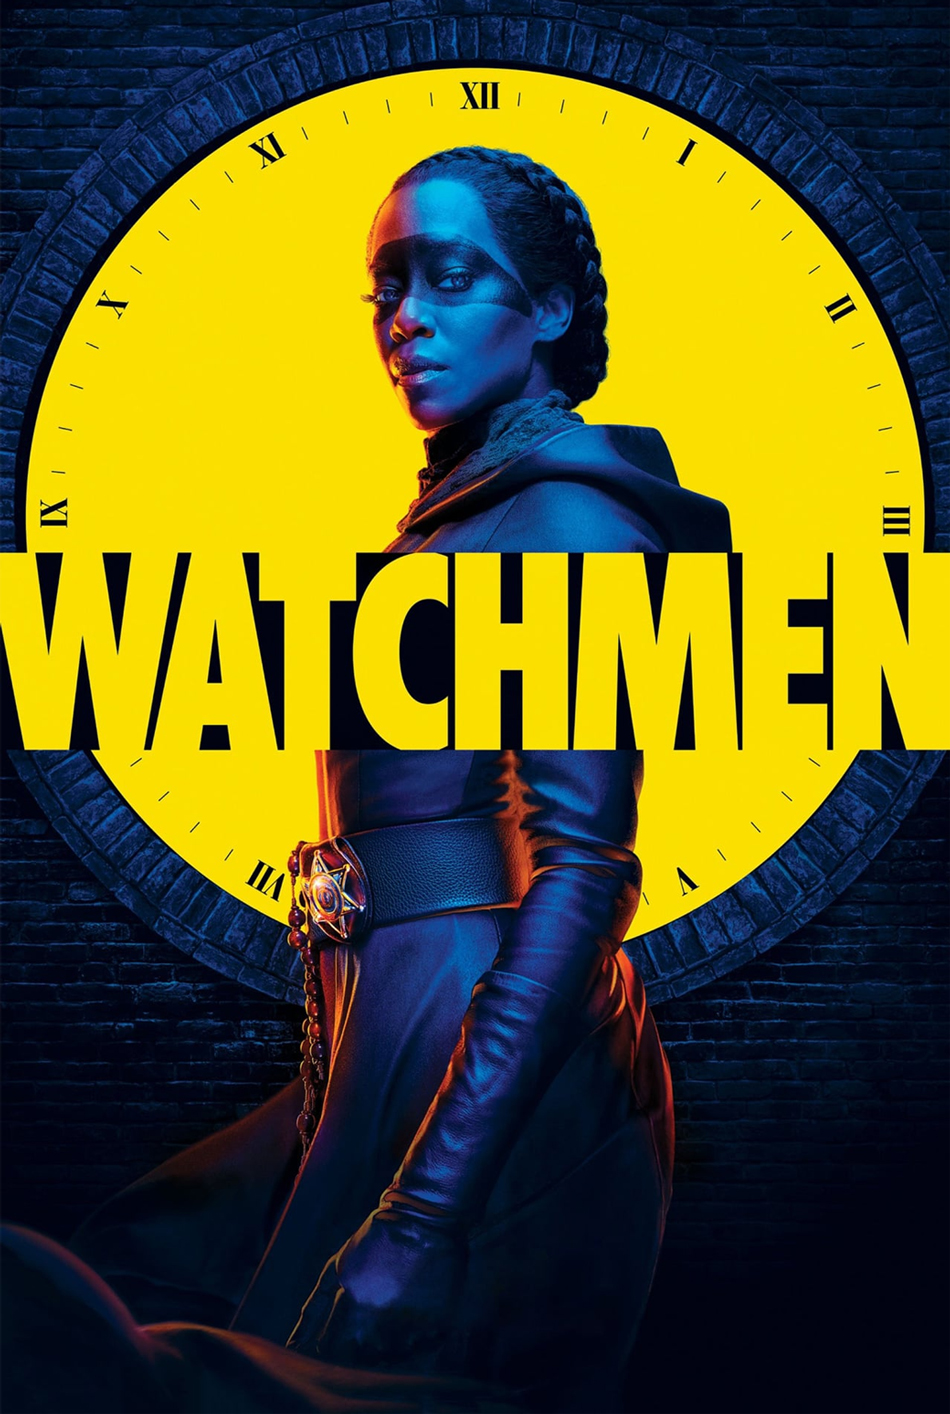 PHOTO: Regina King starred in the HBO Series "The Watchmen." Photo courtesy of Home Box Office (HBO).